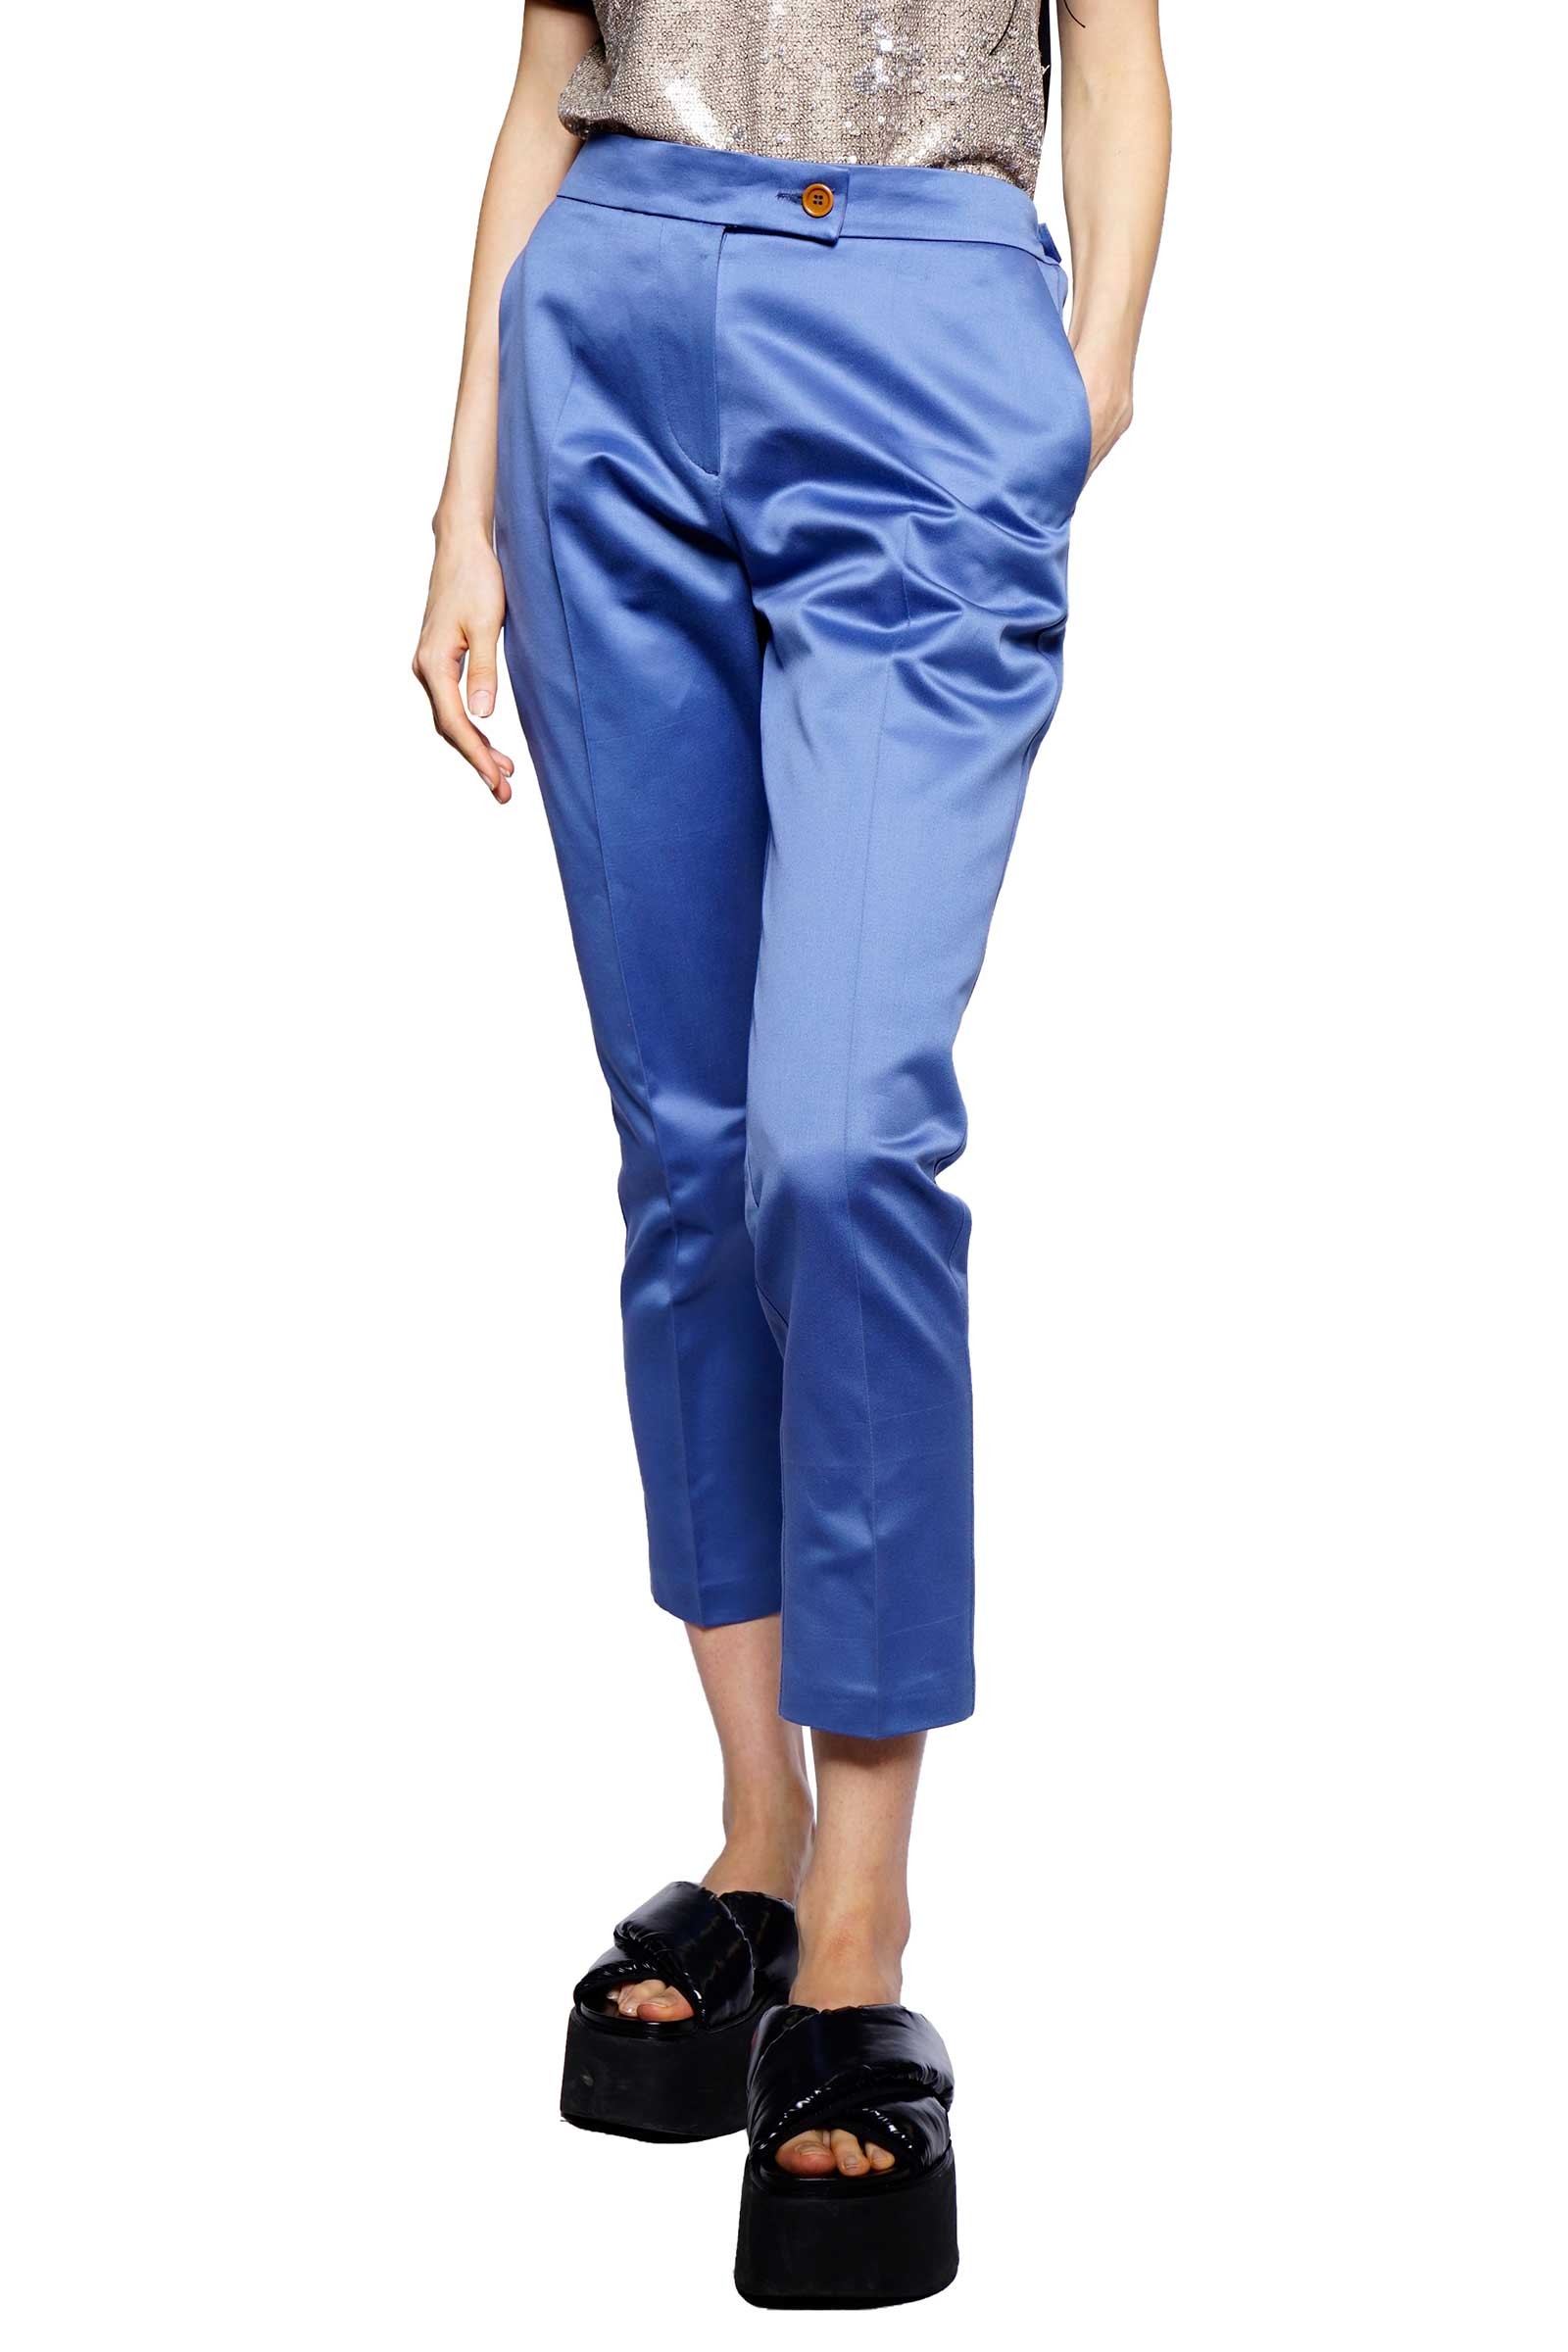 Blue satin trousers